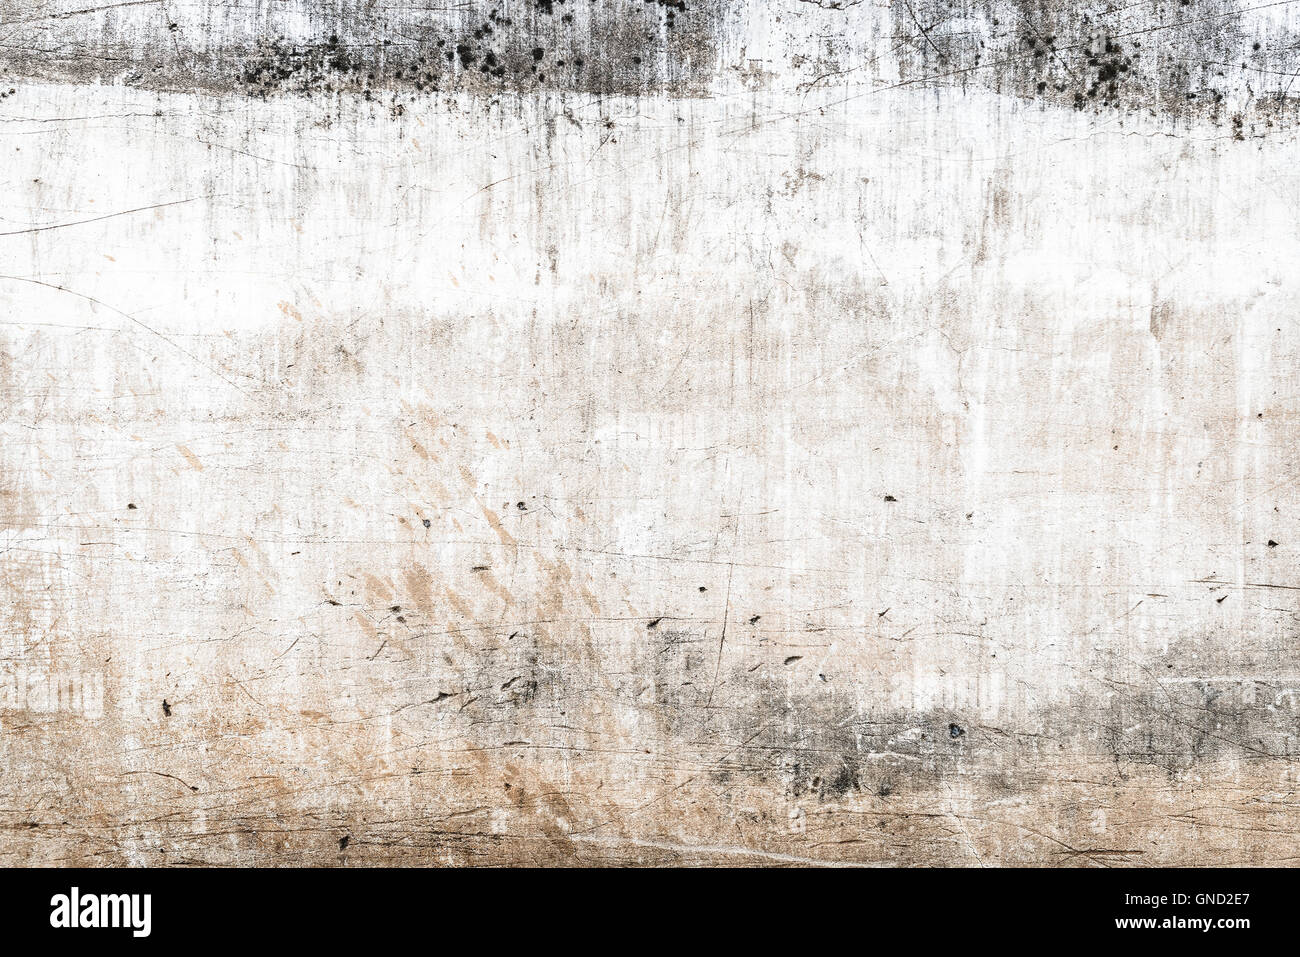 The grunge wall background. Stock Photo